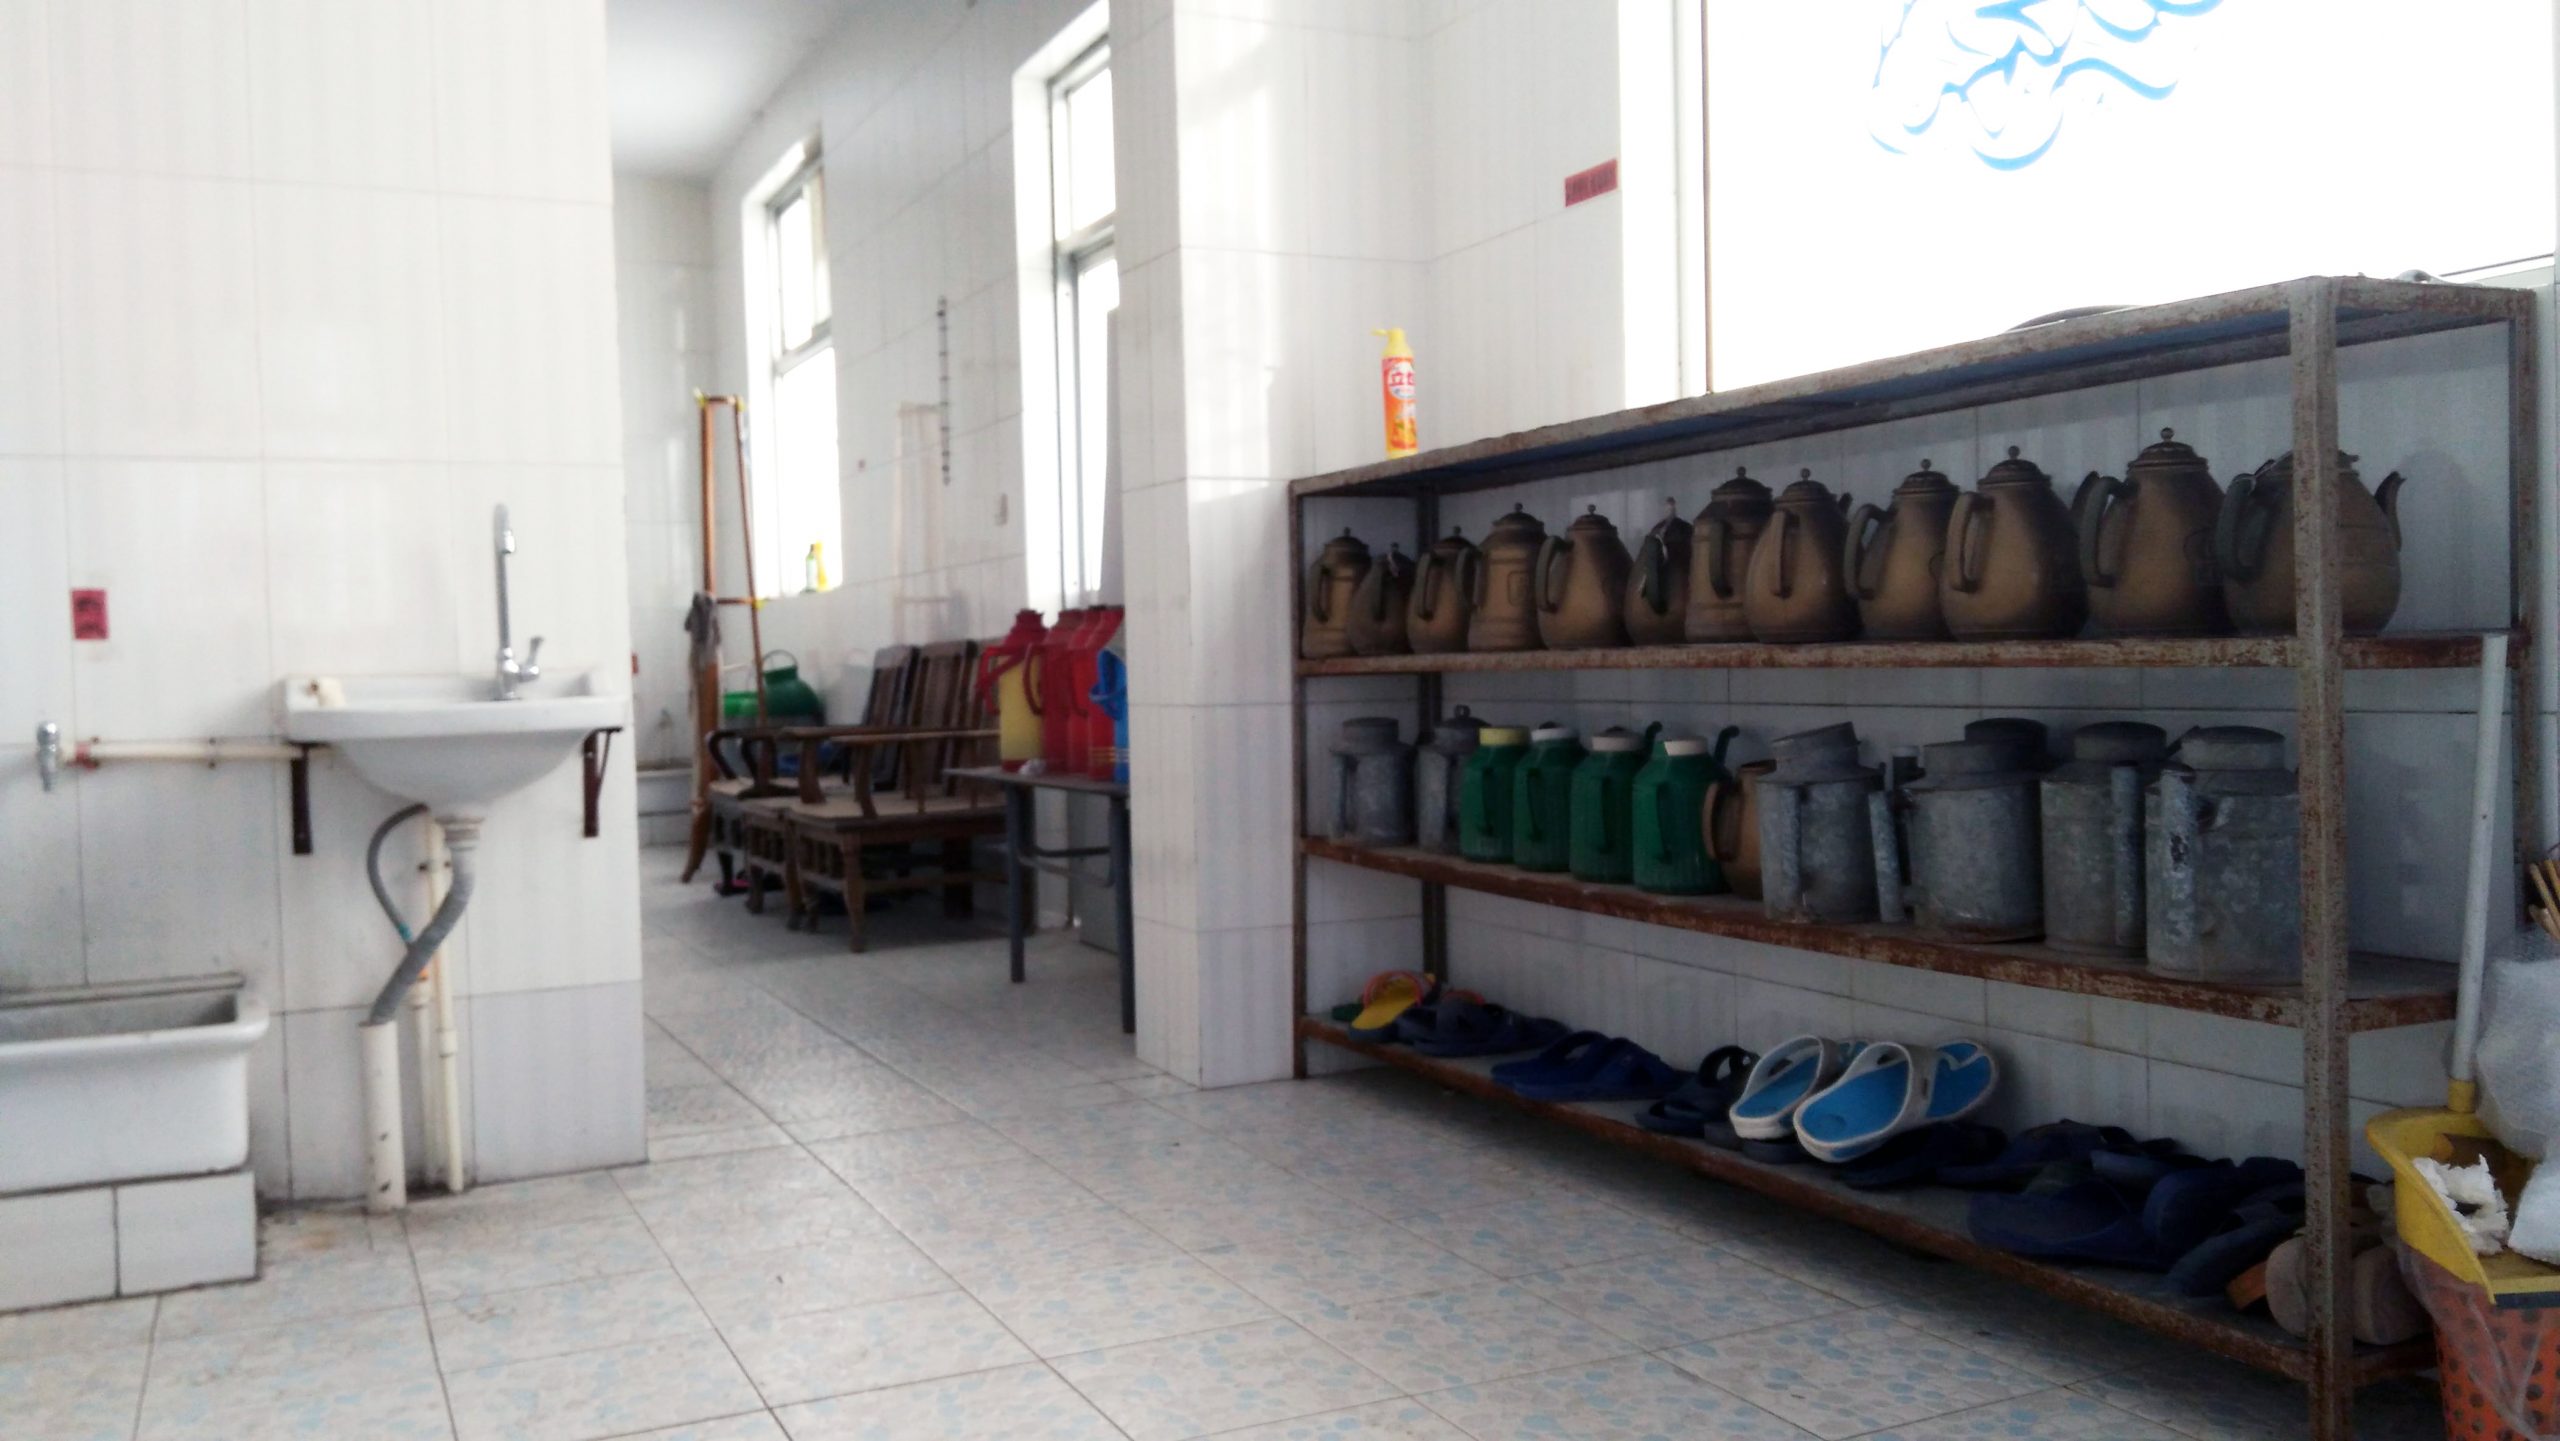 Plastic and metal pitchers in the washroom of a mosque in Zibo, Shandong. Photo courtesy of the author.